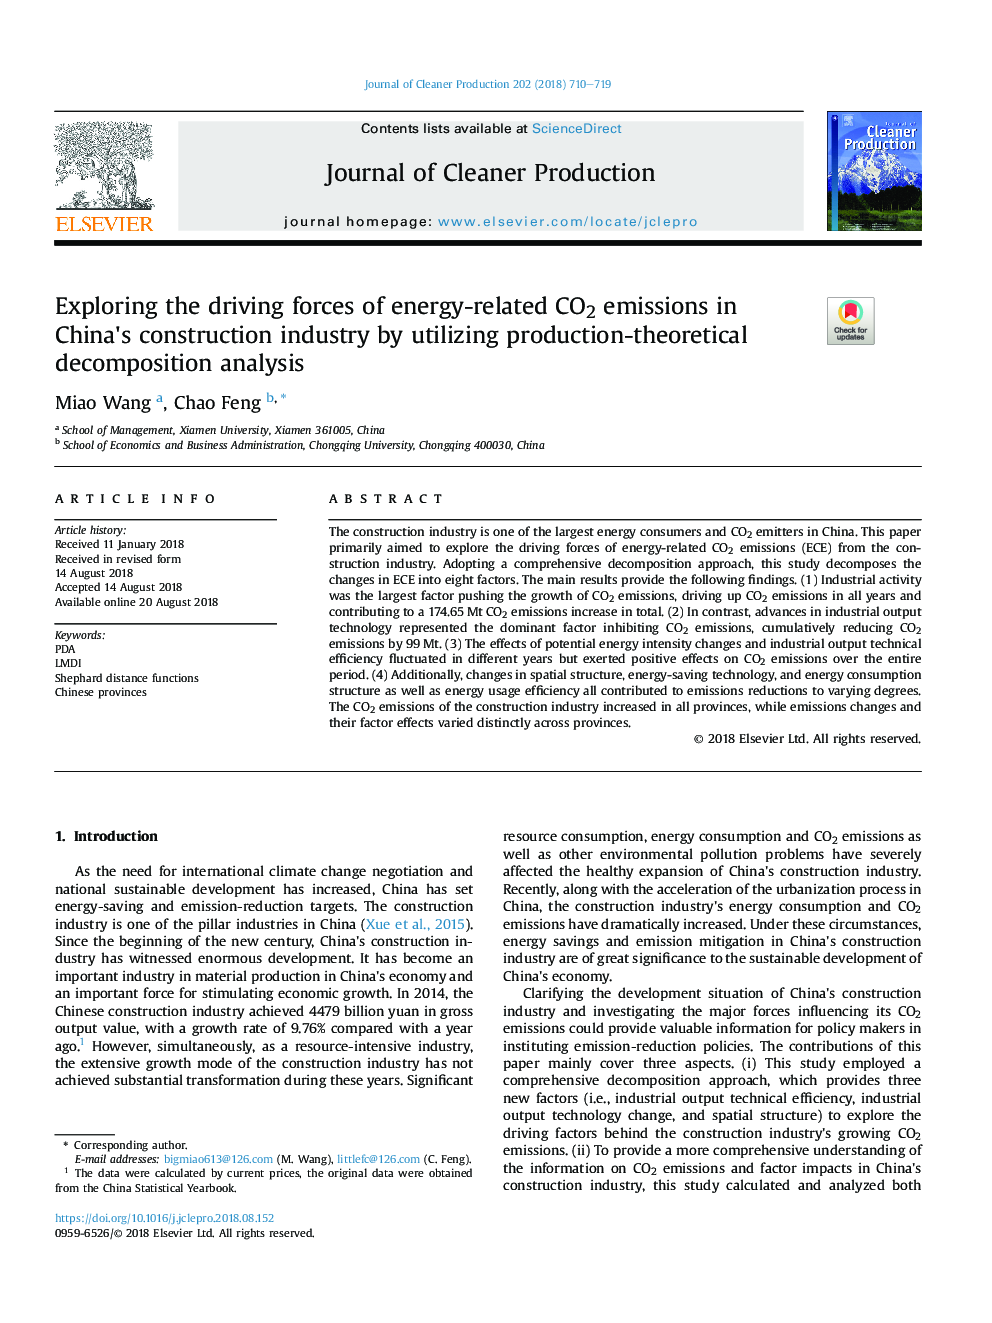 Exploring the driving forces of energy-related CO2 emissions in China's construction industry by utilizing production-theoretical decomposition analysis